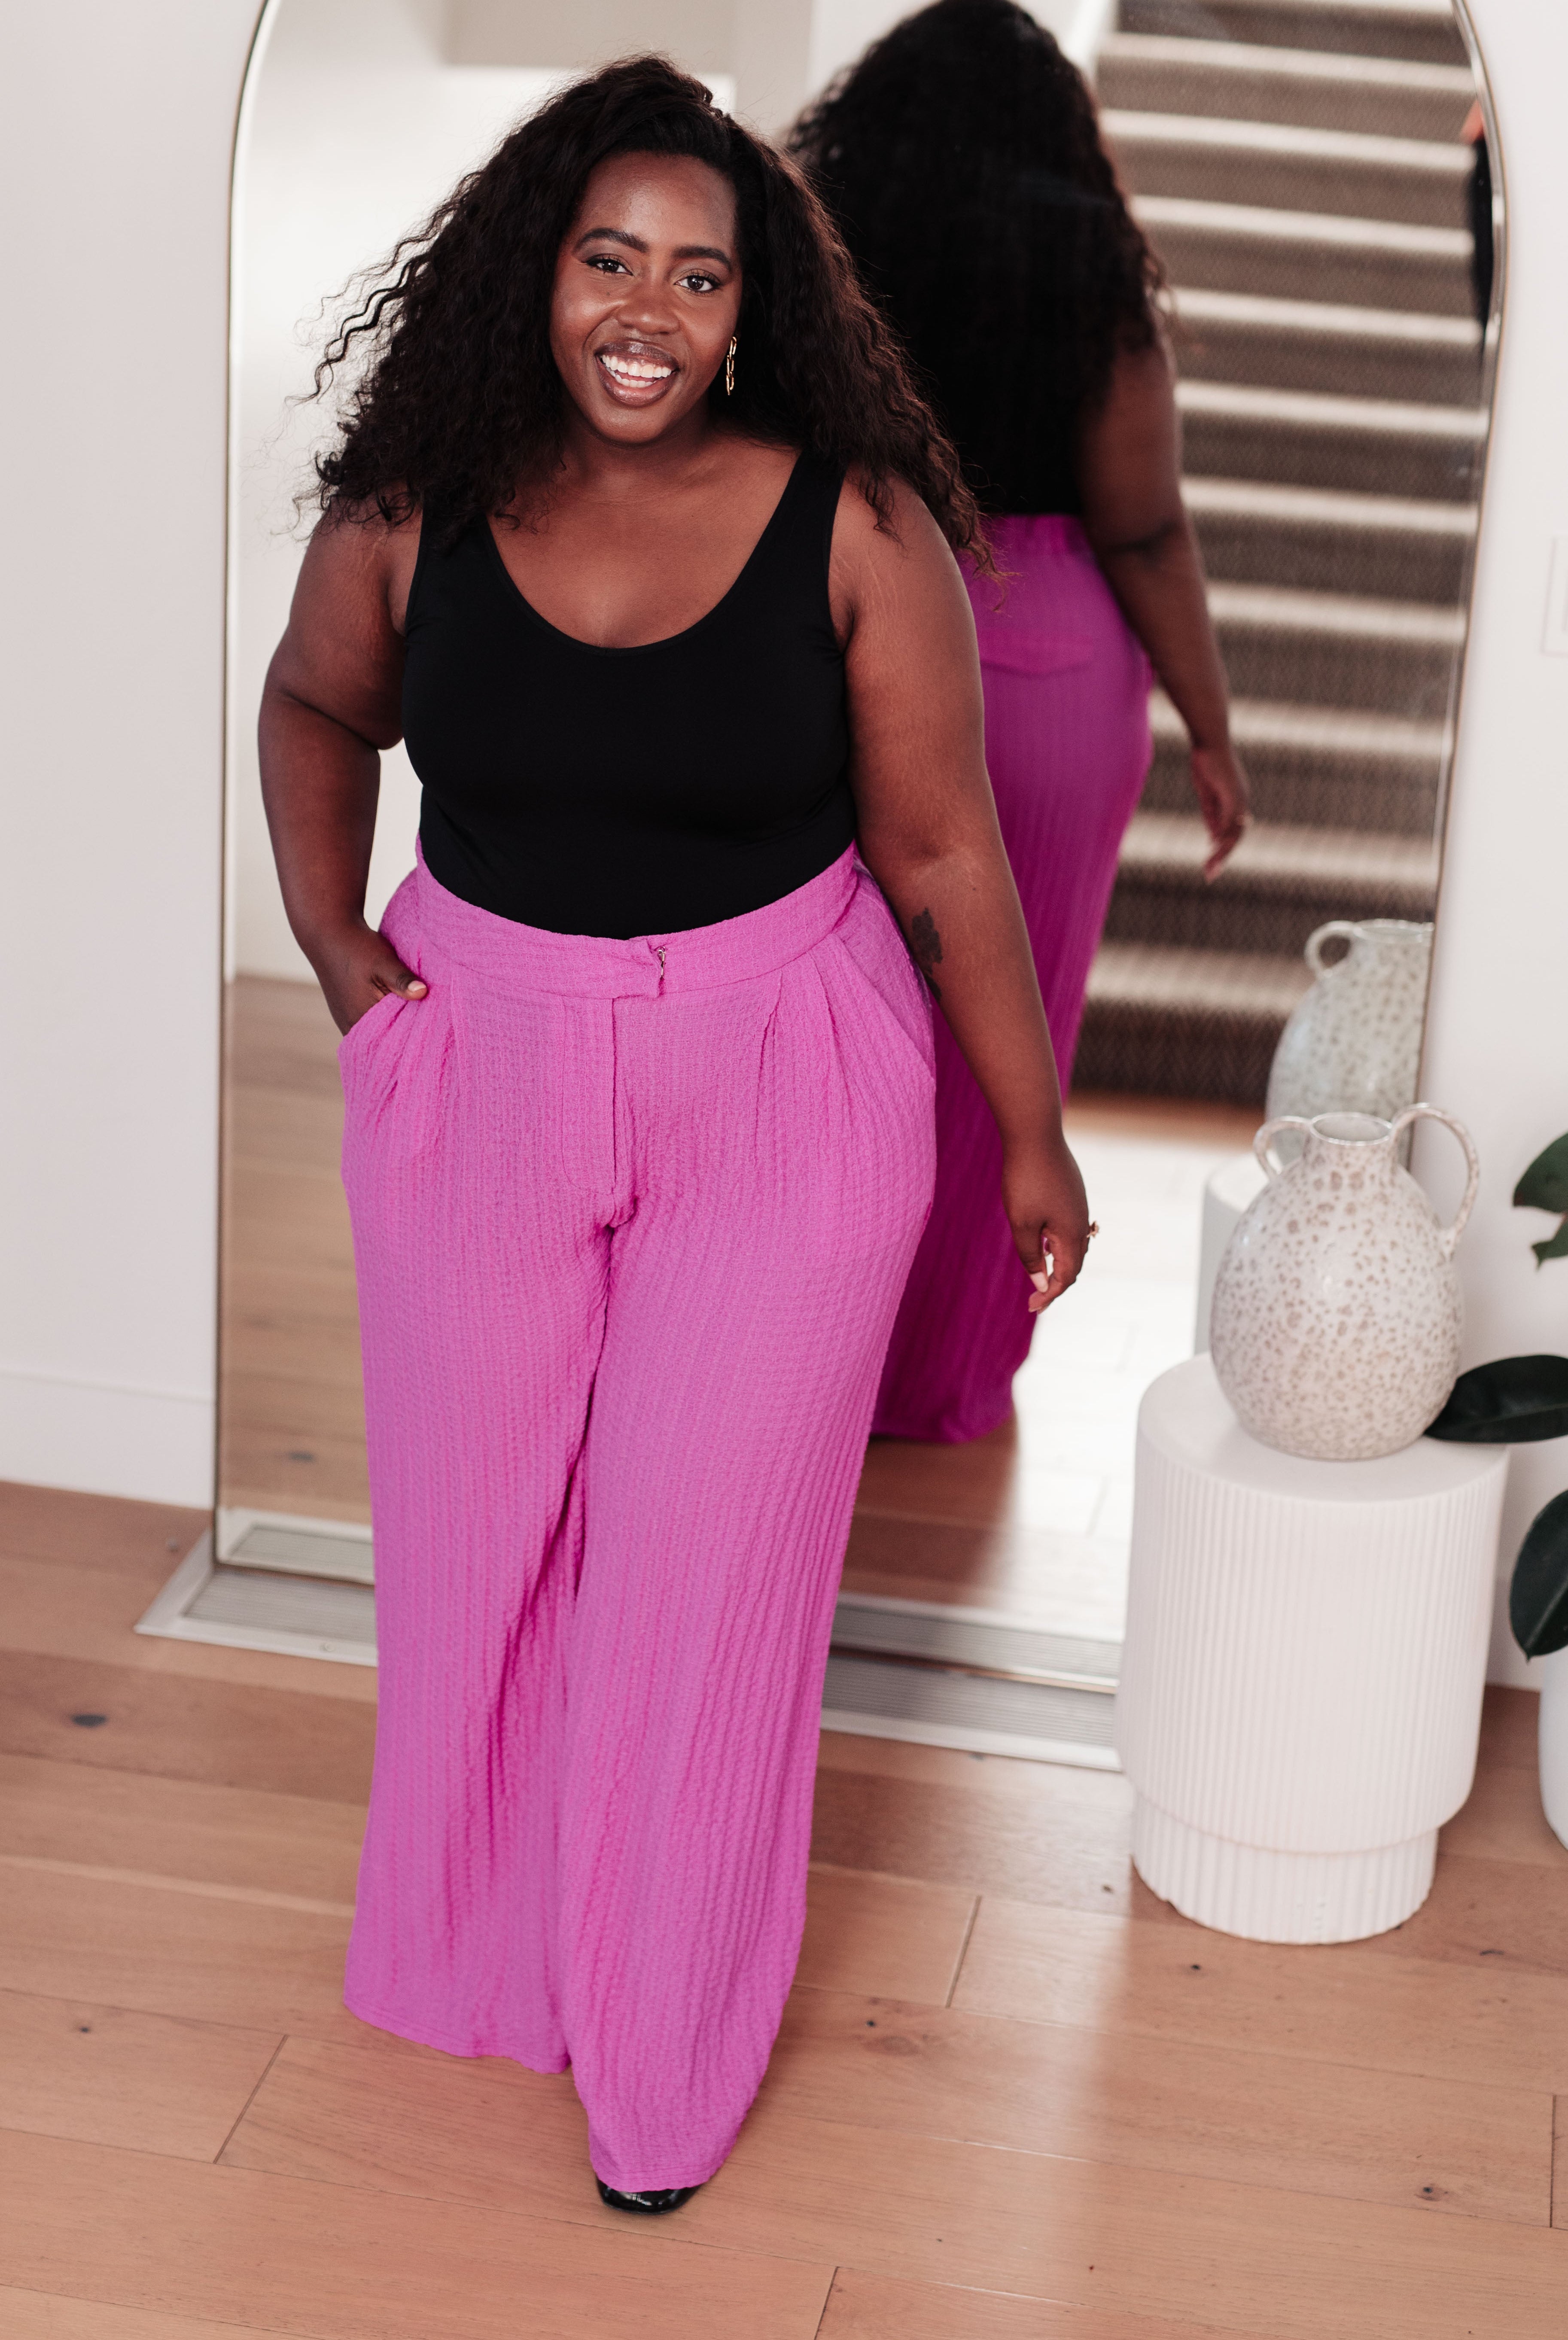 Totally Crazy Still Wide Leg Pants-Pants- Simply Simpson's Boutique is a Women's Online Fashion Boutique Located in Jupiter, Florida